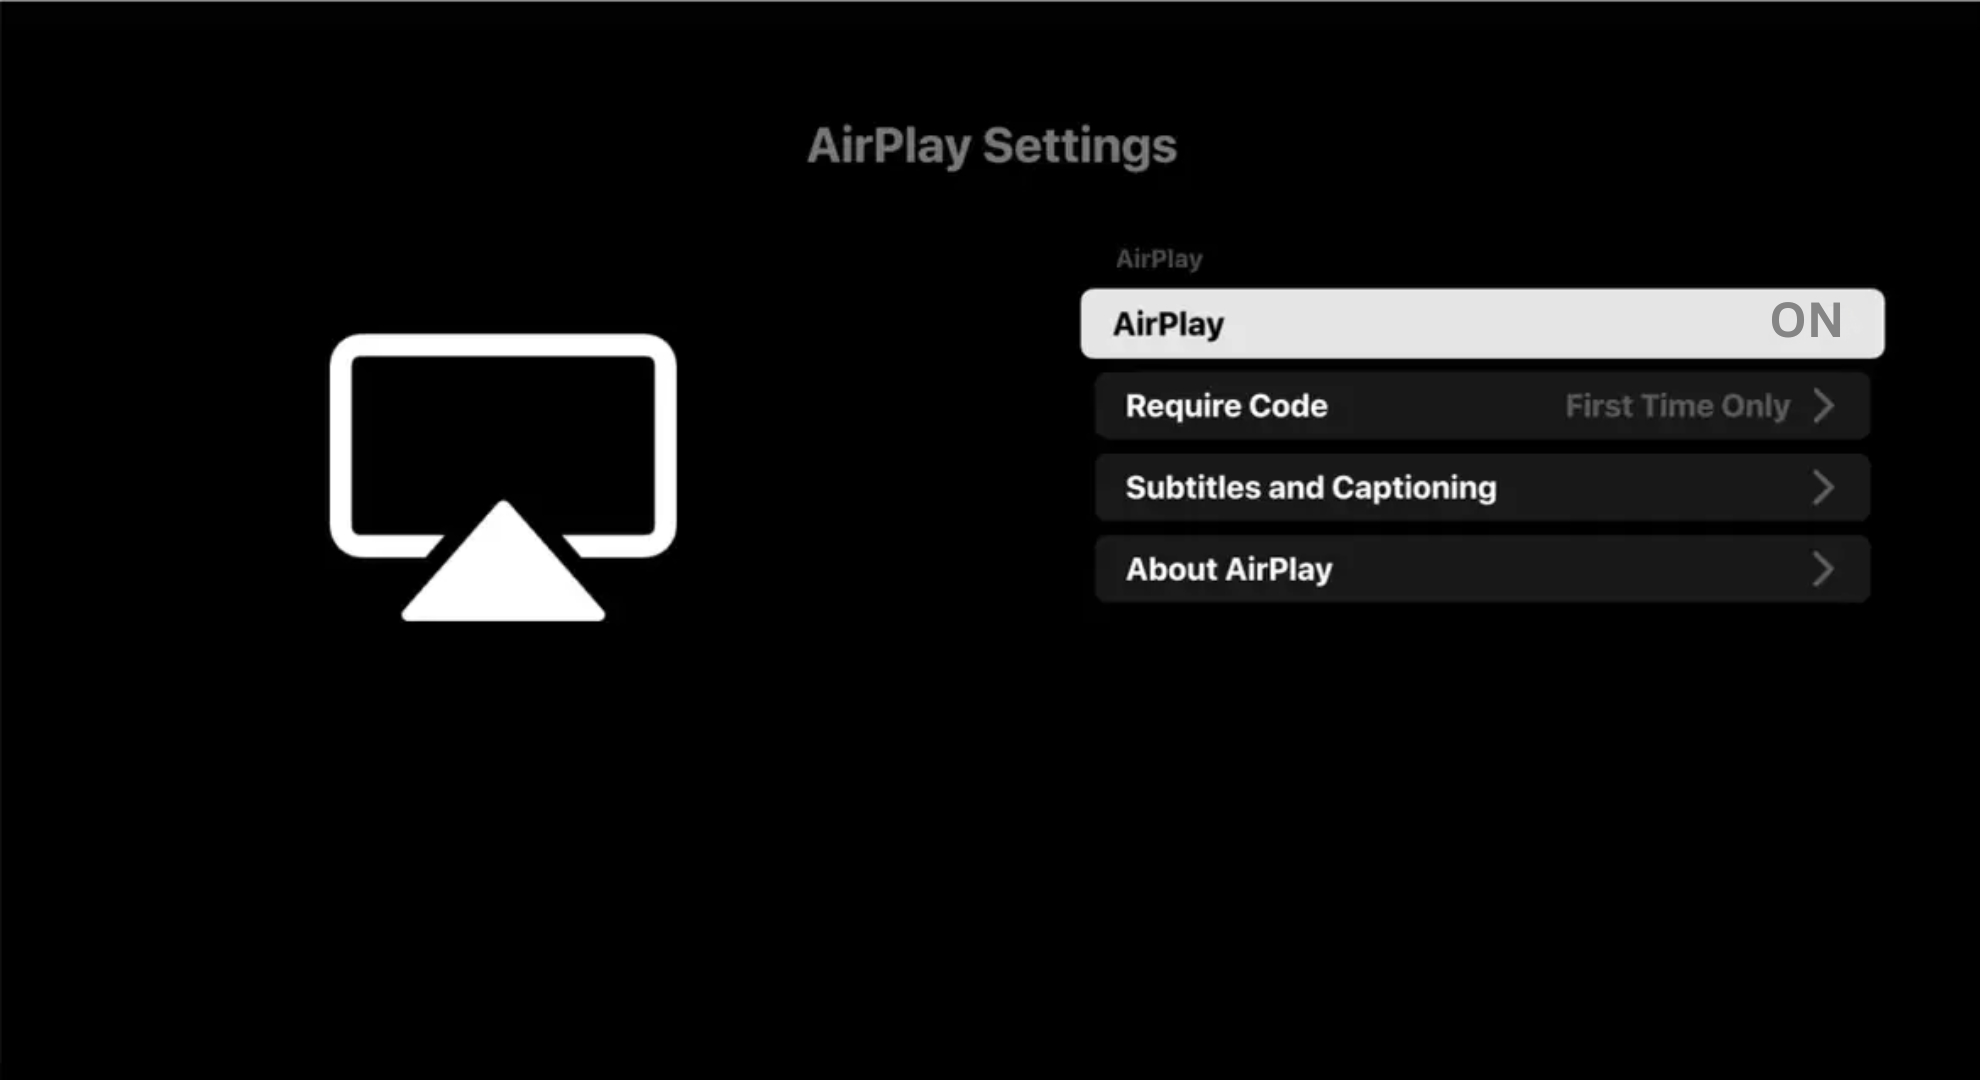 Turn on AirPlay on your Samsung TV